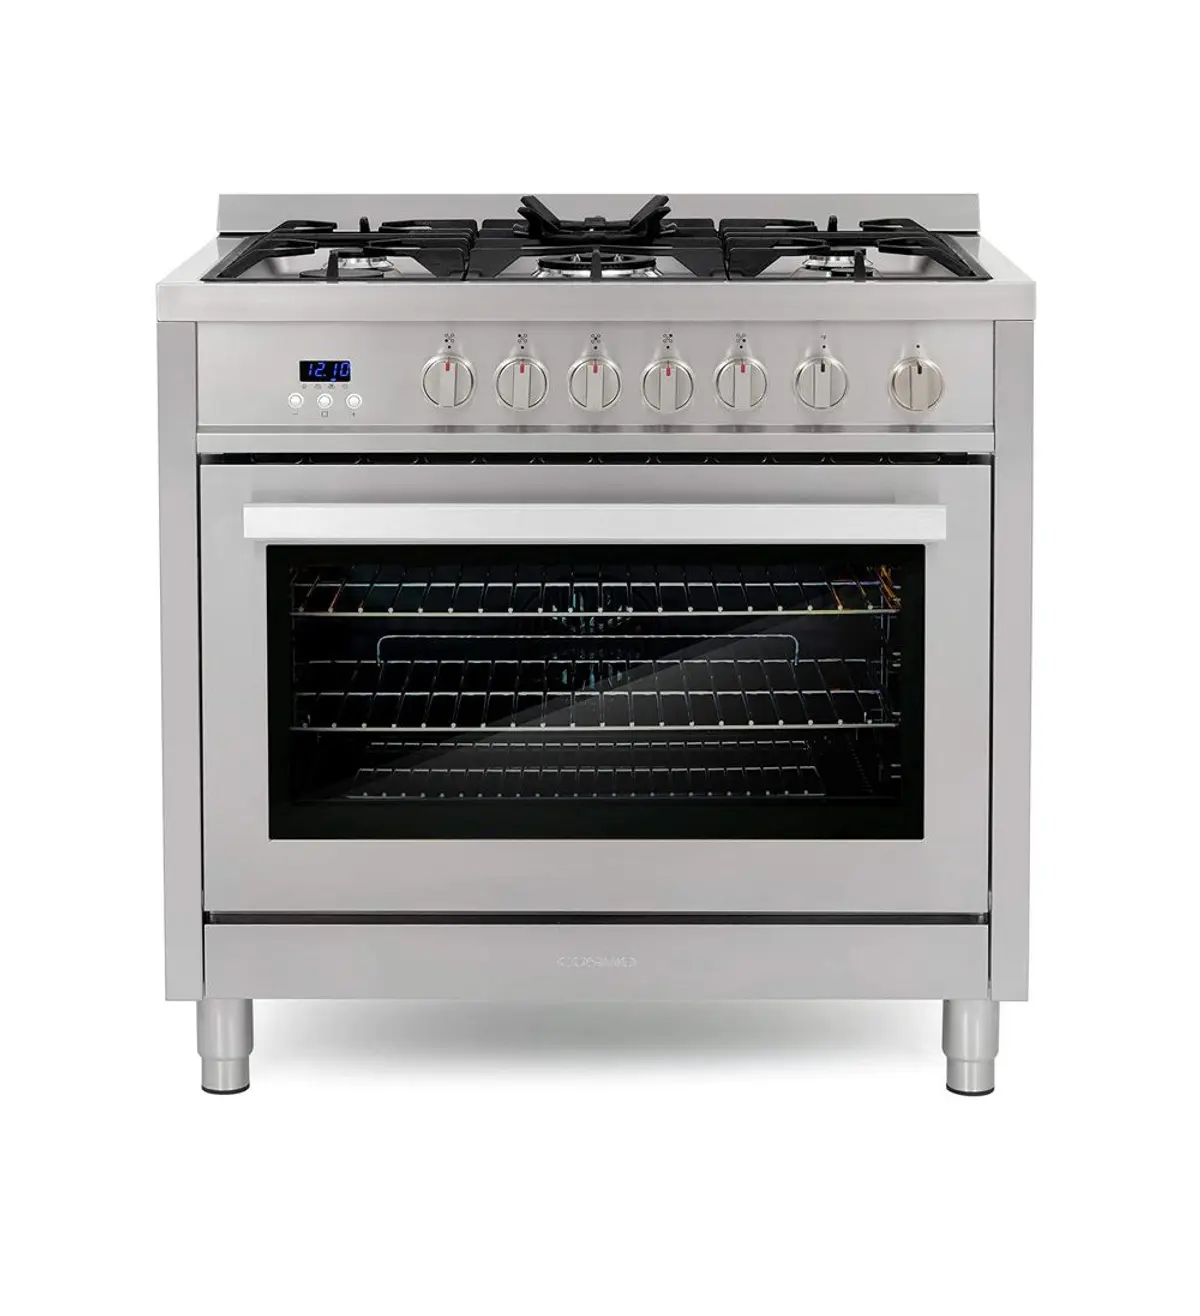 Cosmo 36 Inch Freestanding Single Oven review